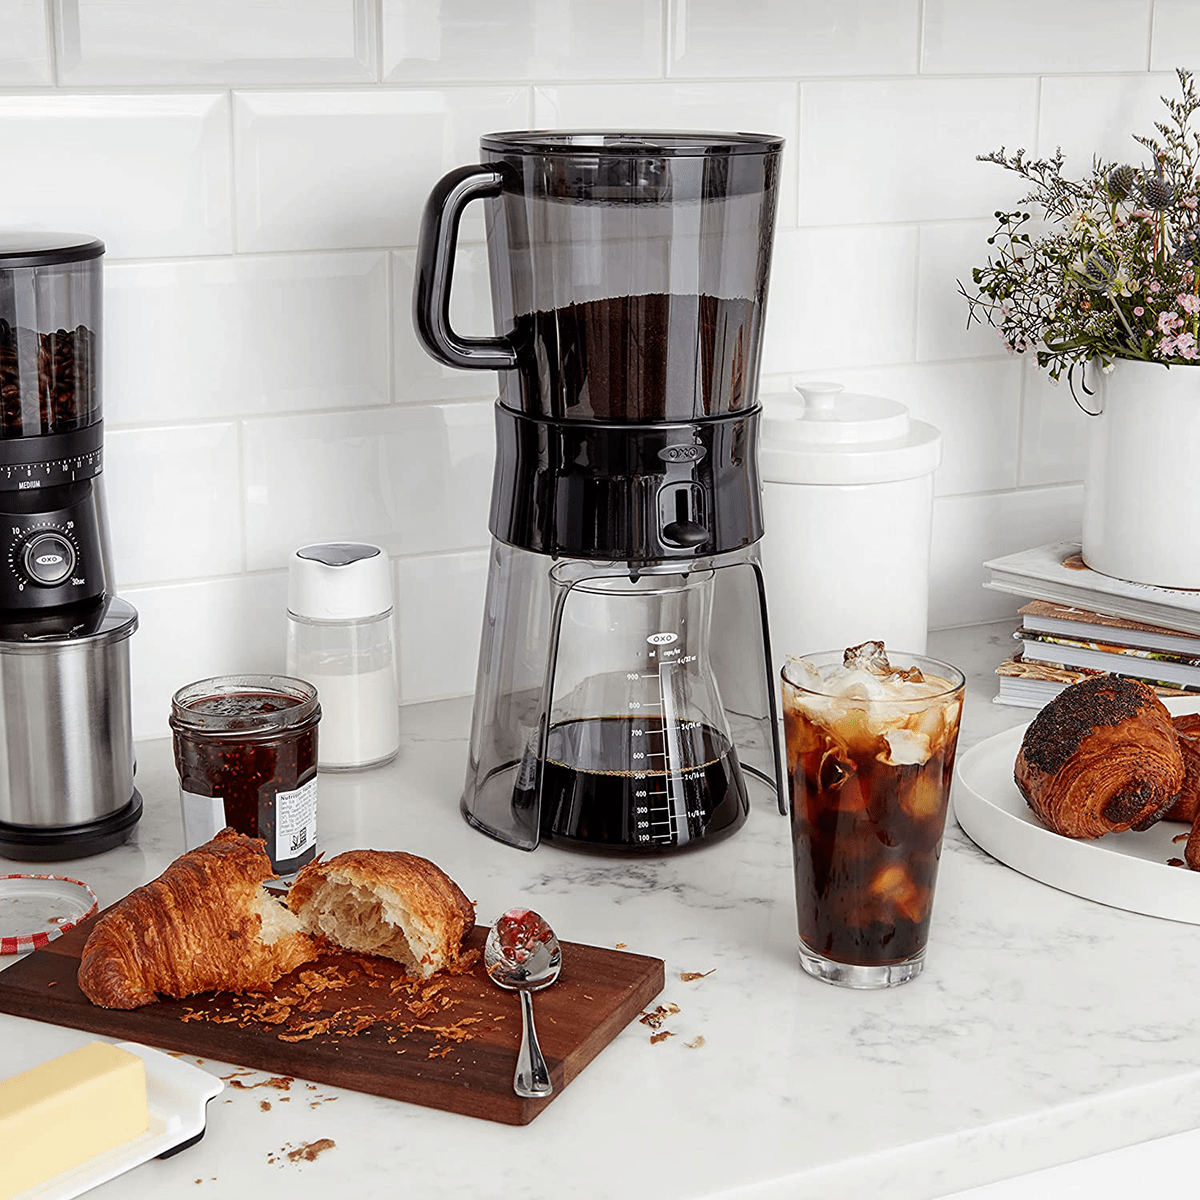 https://www.tasteofhome.com/wp-content/uploads/2023/04/oxo-good-grips-cold-brew-coffee-maker-via-amazon.com-ecomm.png?fit=700%2C700